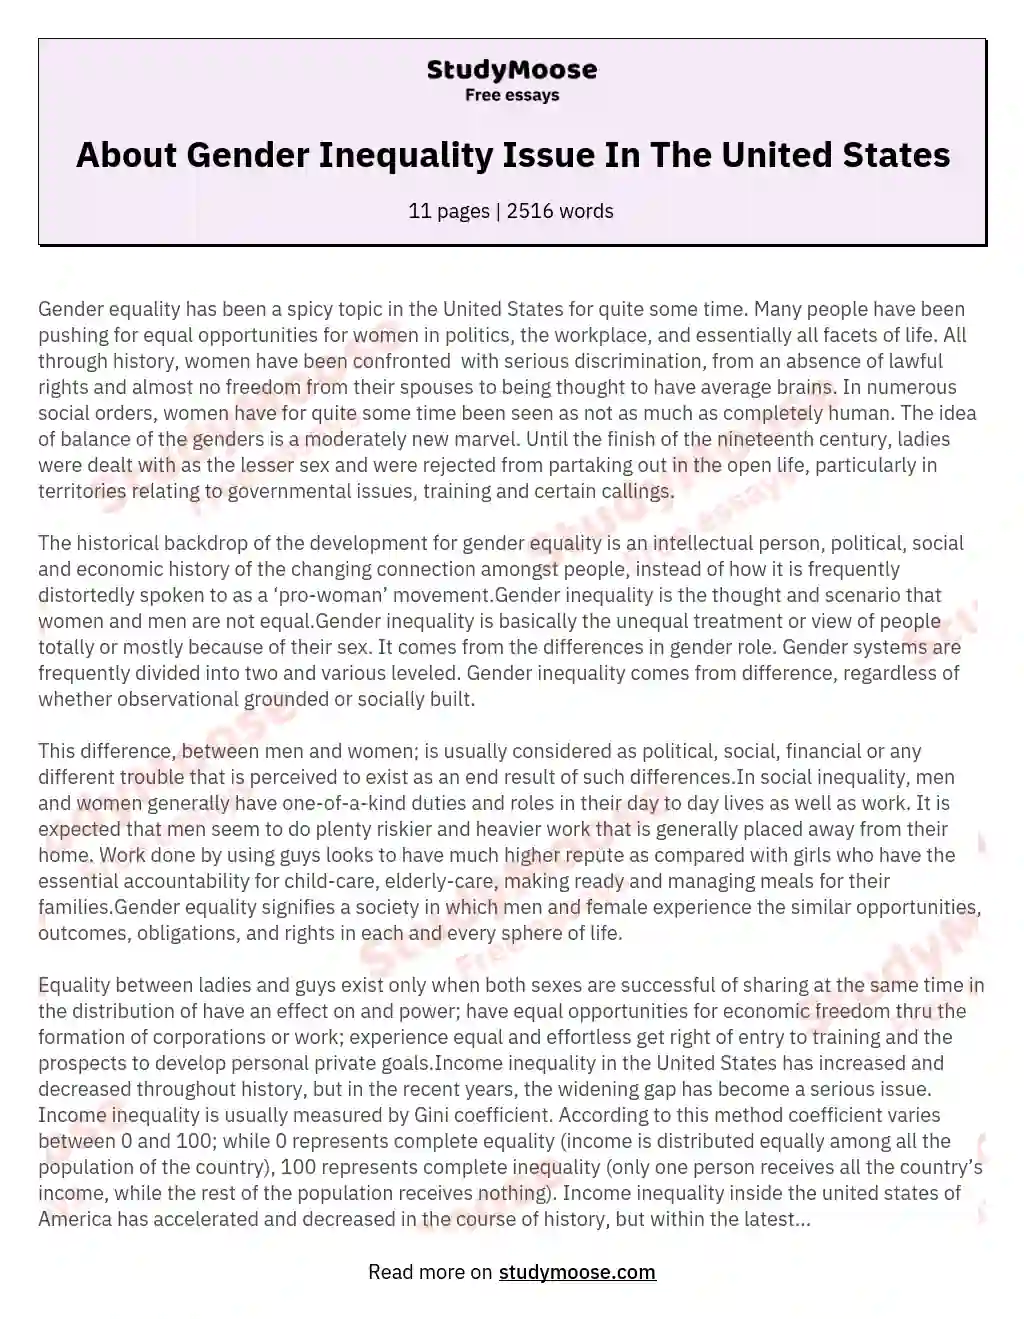 About Gender Inequality Issue In The United States essay